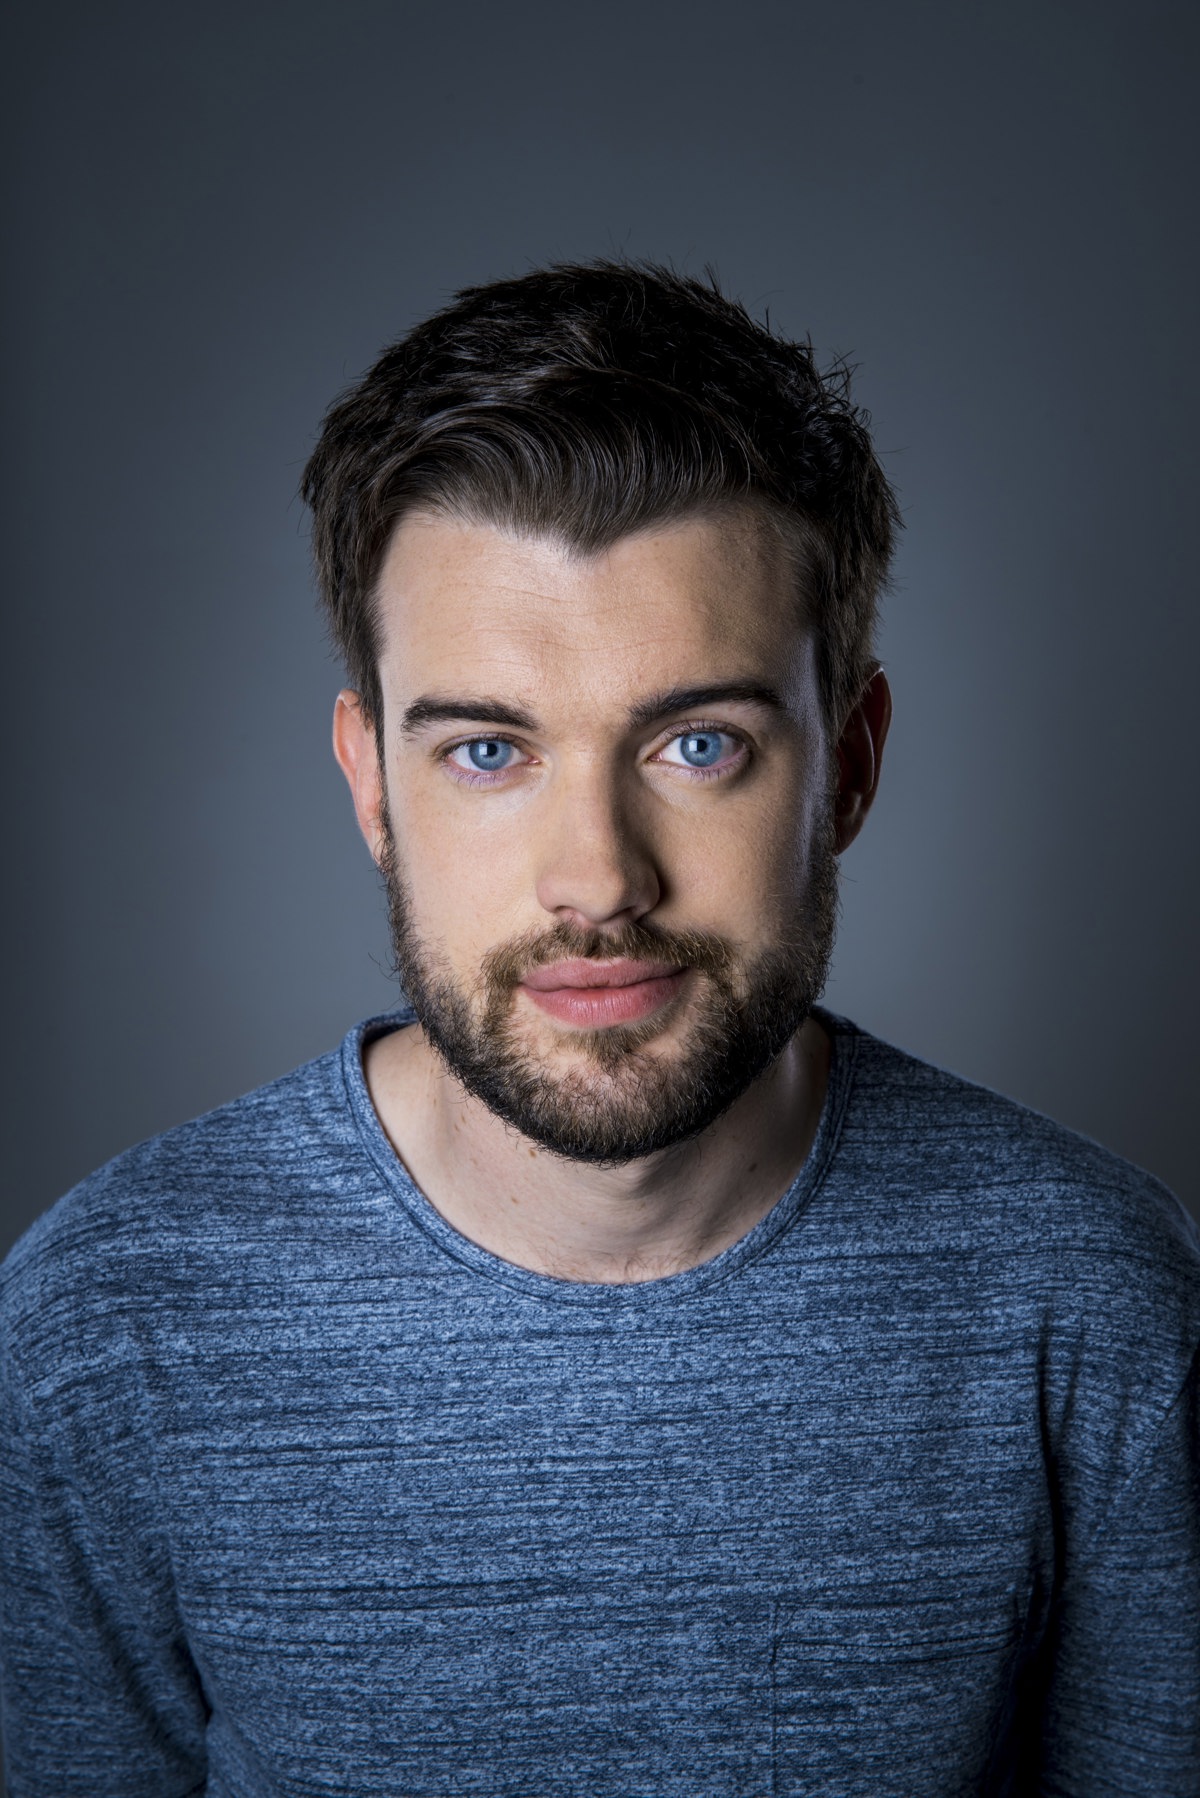 Award-winning comedian and actor Jack Whitehall returns to host  The BRIT Awards 2019 with Mastercard